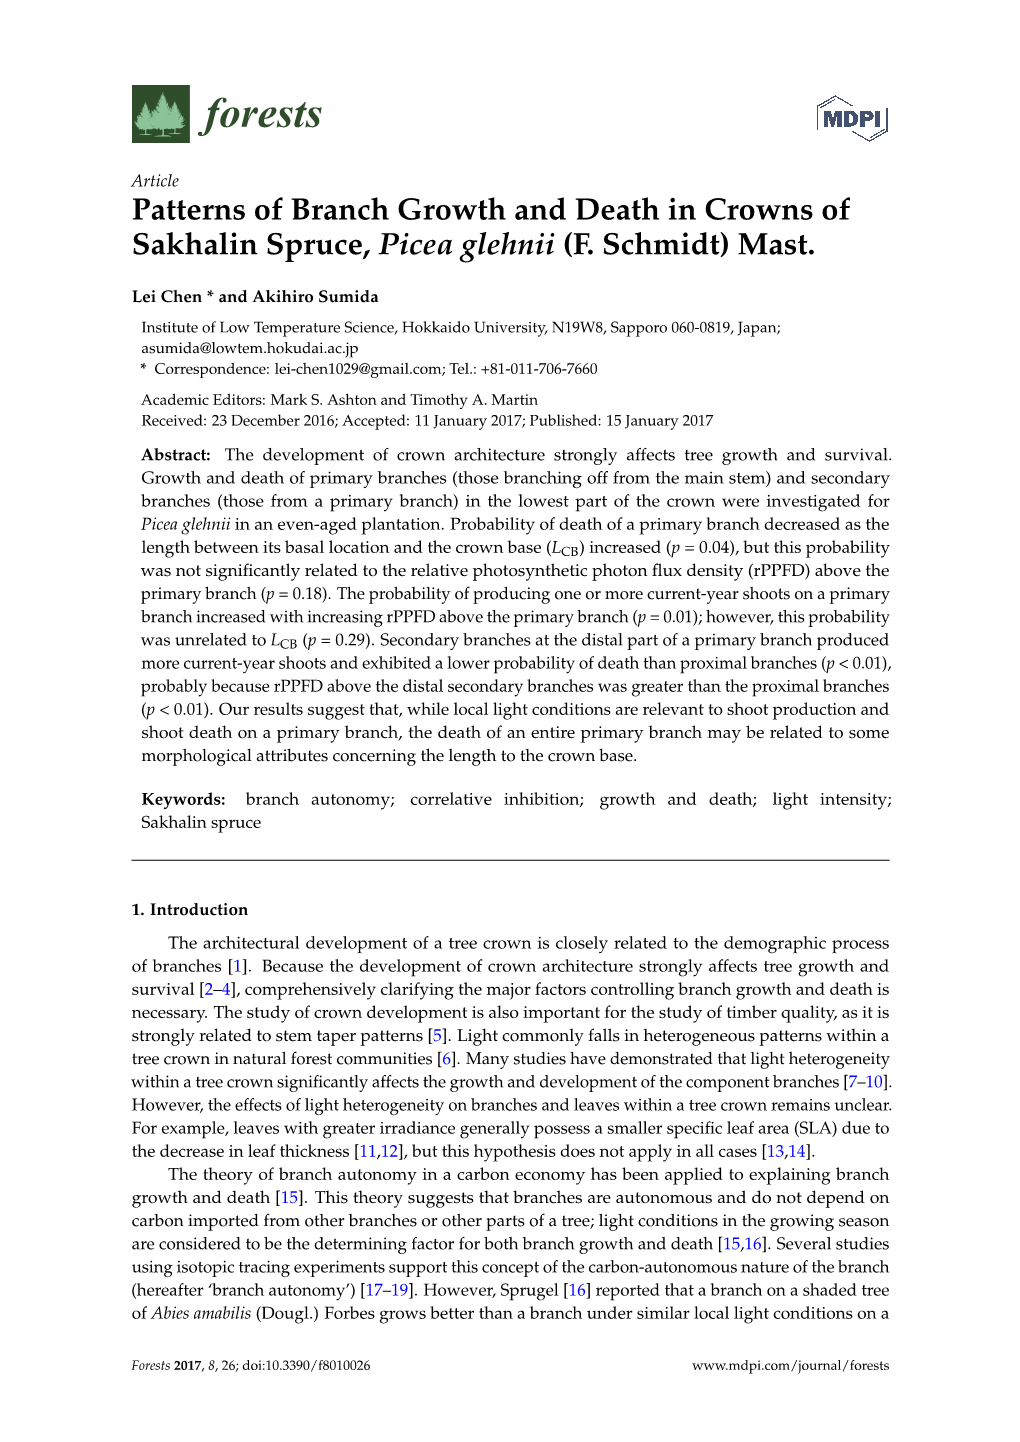 Patterns of Branch Growth and Death in Crowns of Sakhalin Spruce, Picea Glehnii (F